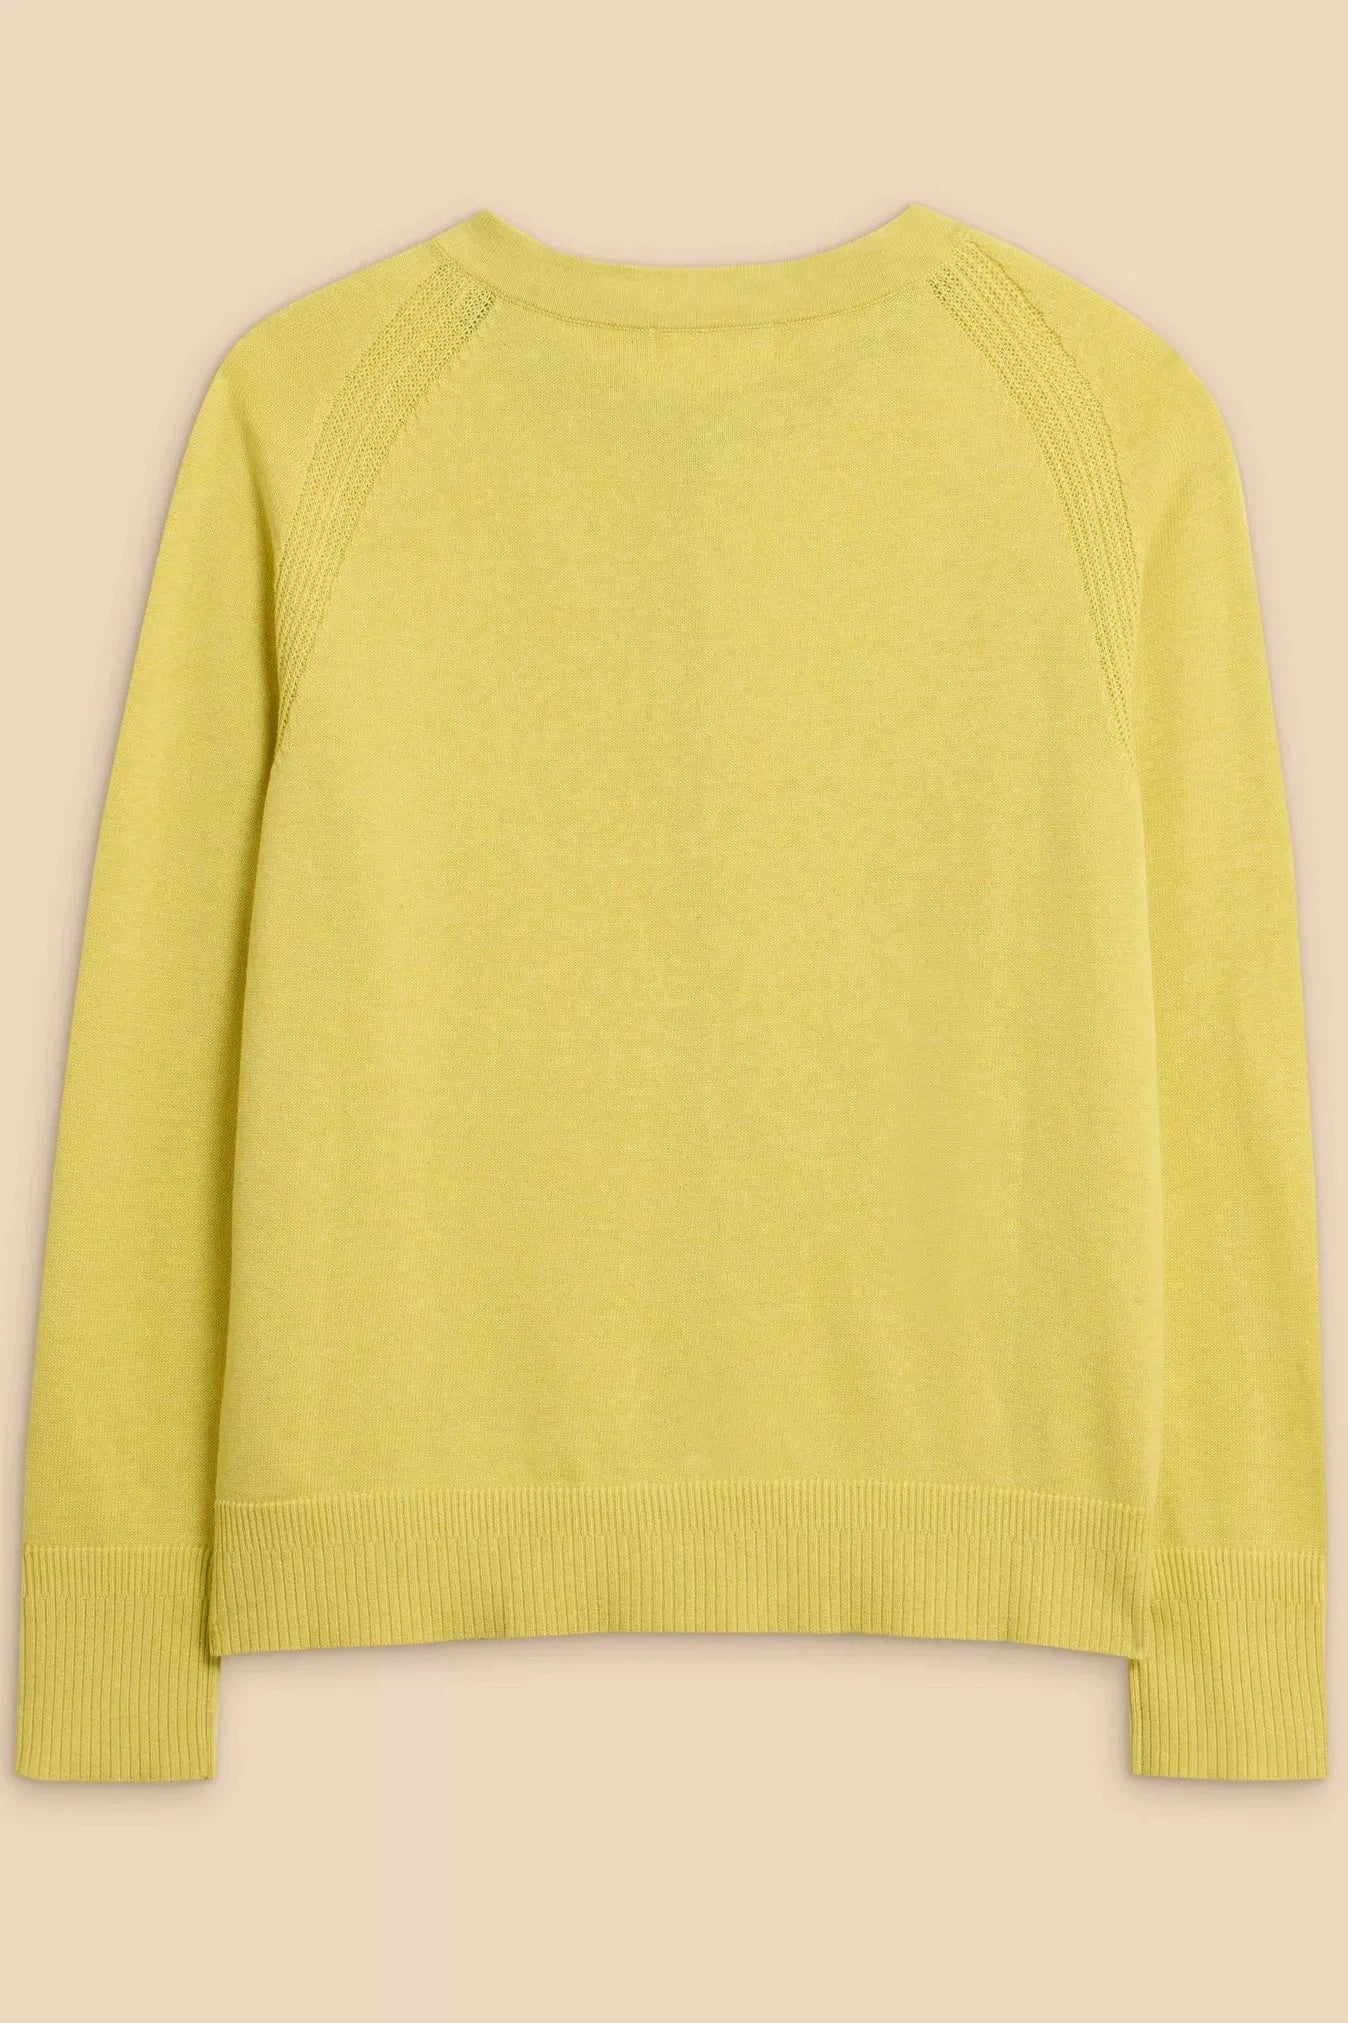 White Stuff Lulu Cardigan - Bright Yellow-Womens-Ohh! By Gum - Shop Sustainable